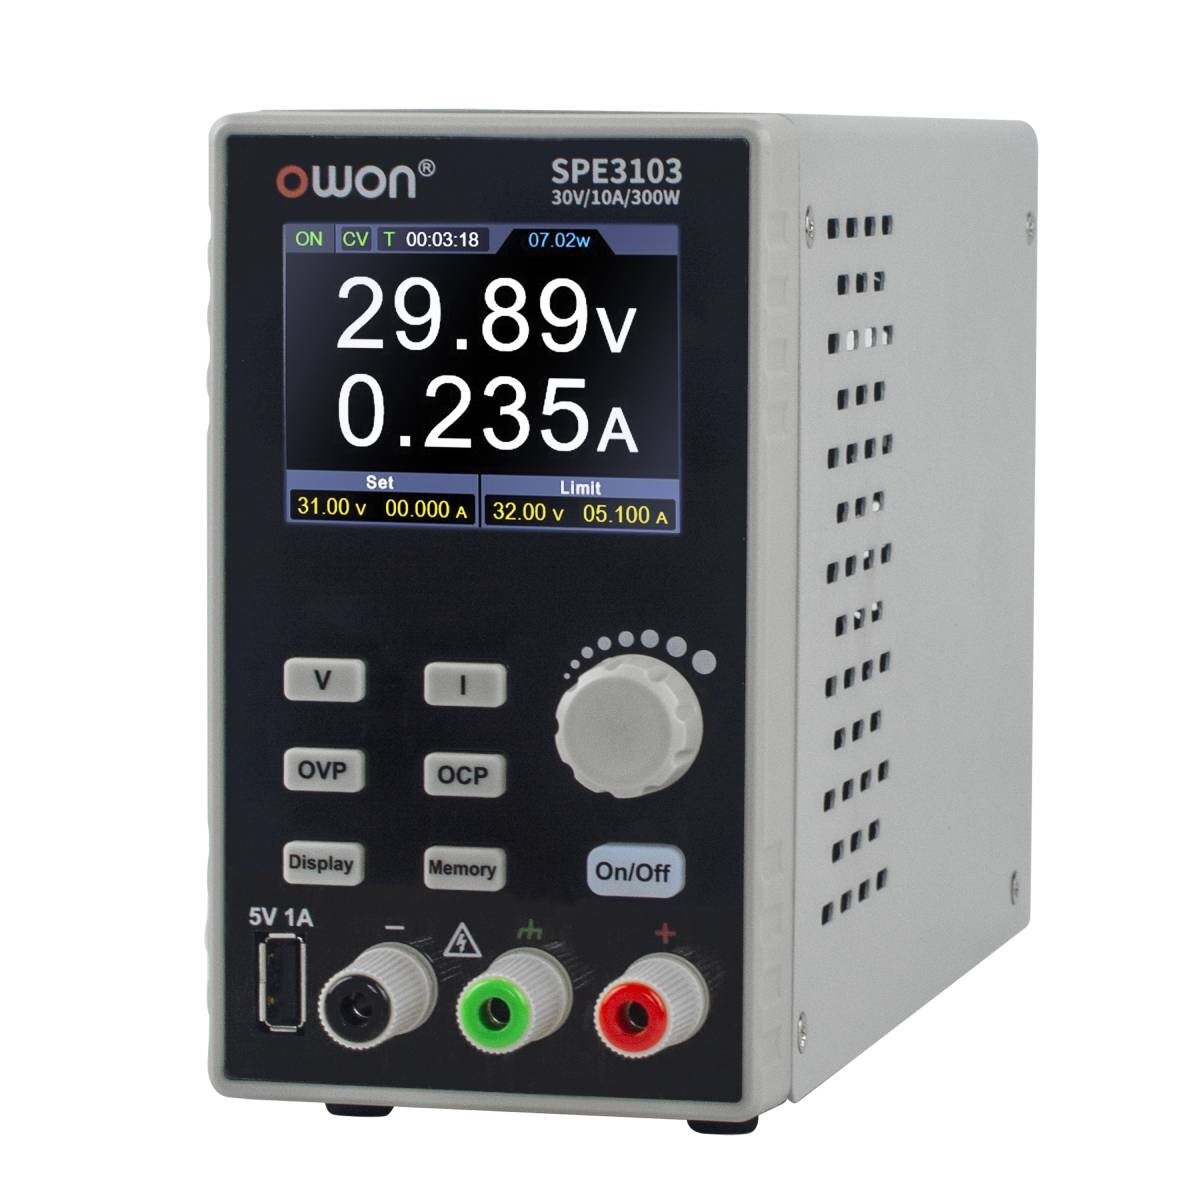 best price,owon,spe3103,dc,power,supply,discount